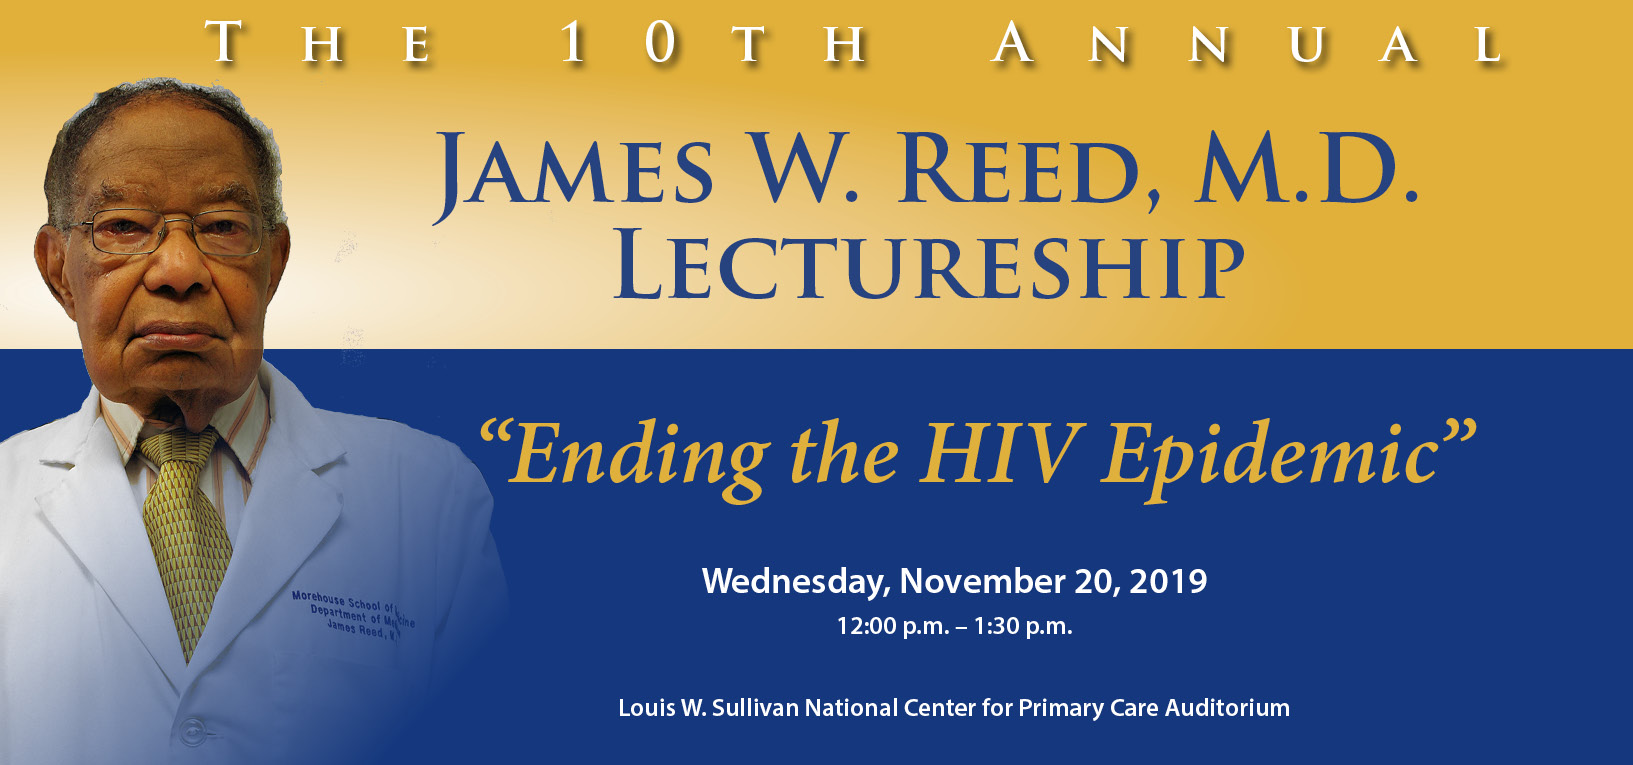 James W. Reed, M.D. Lectureship